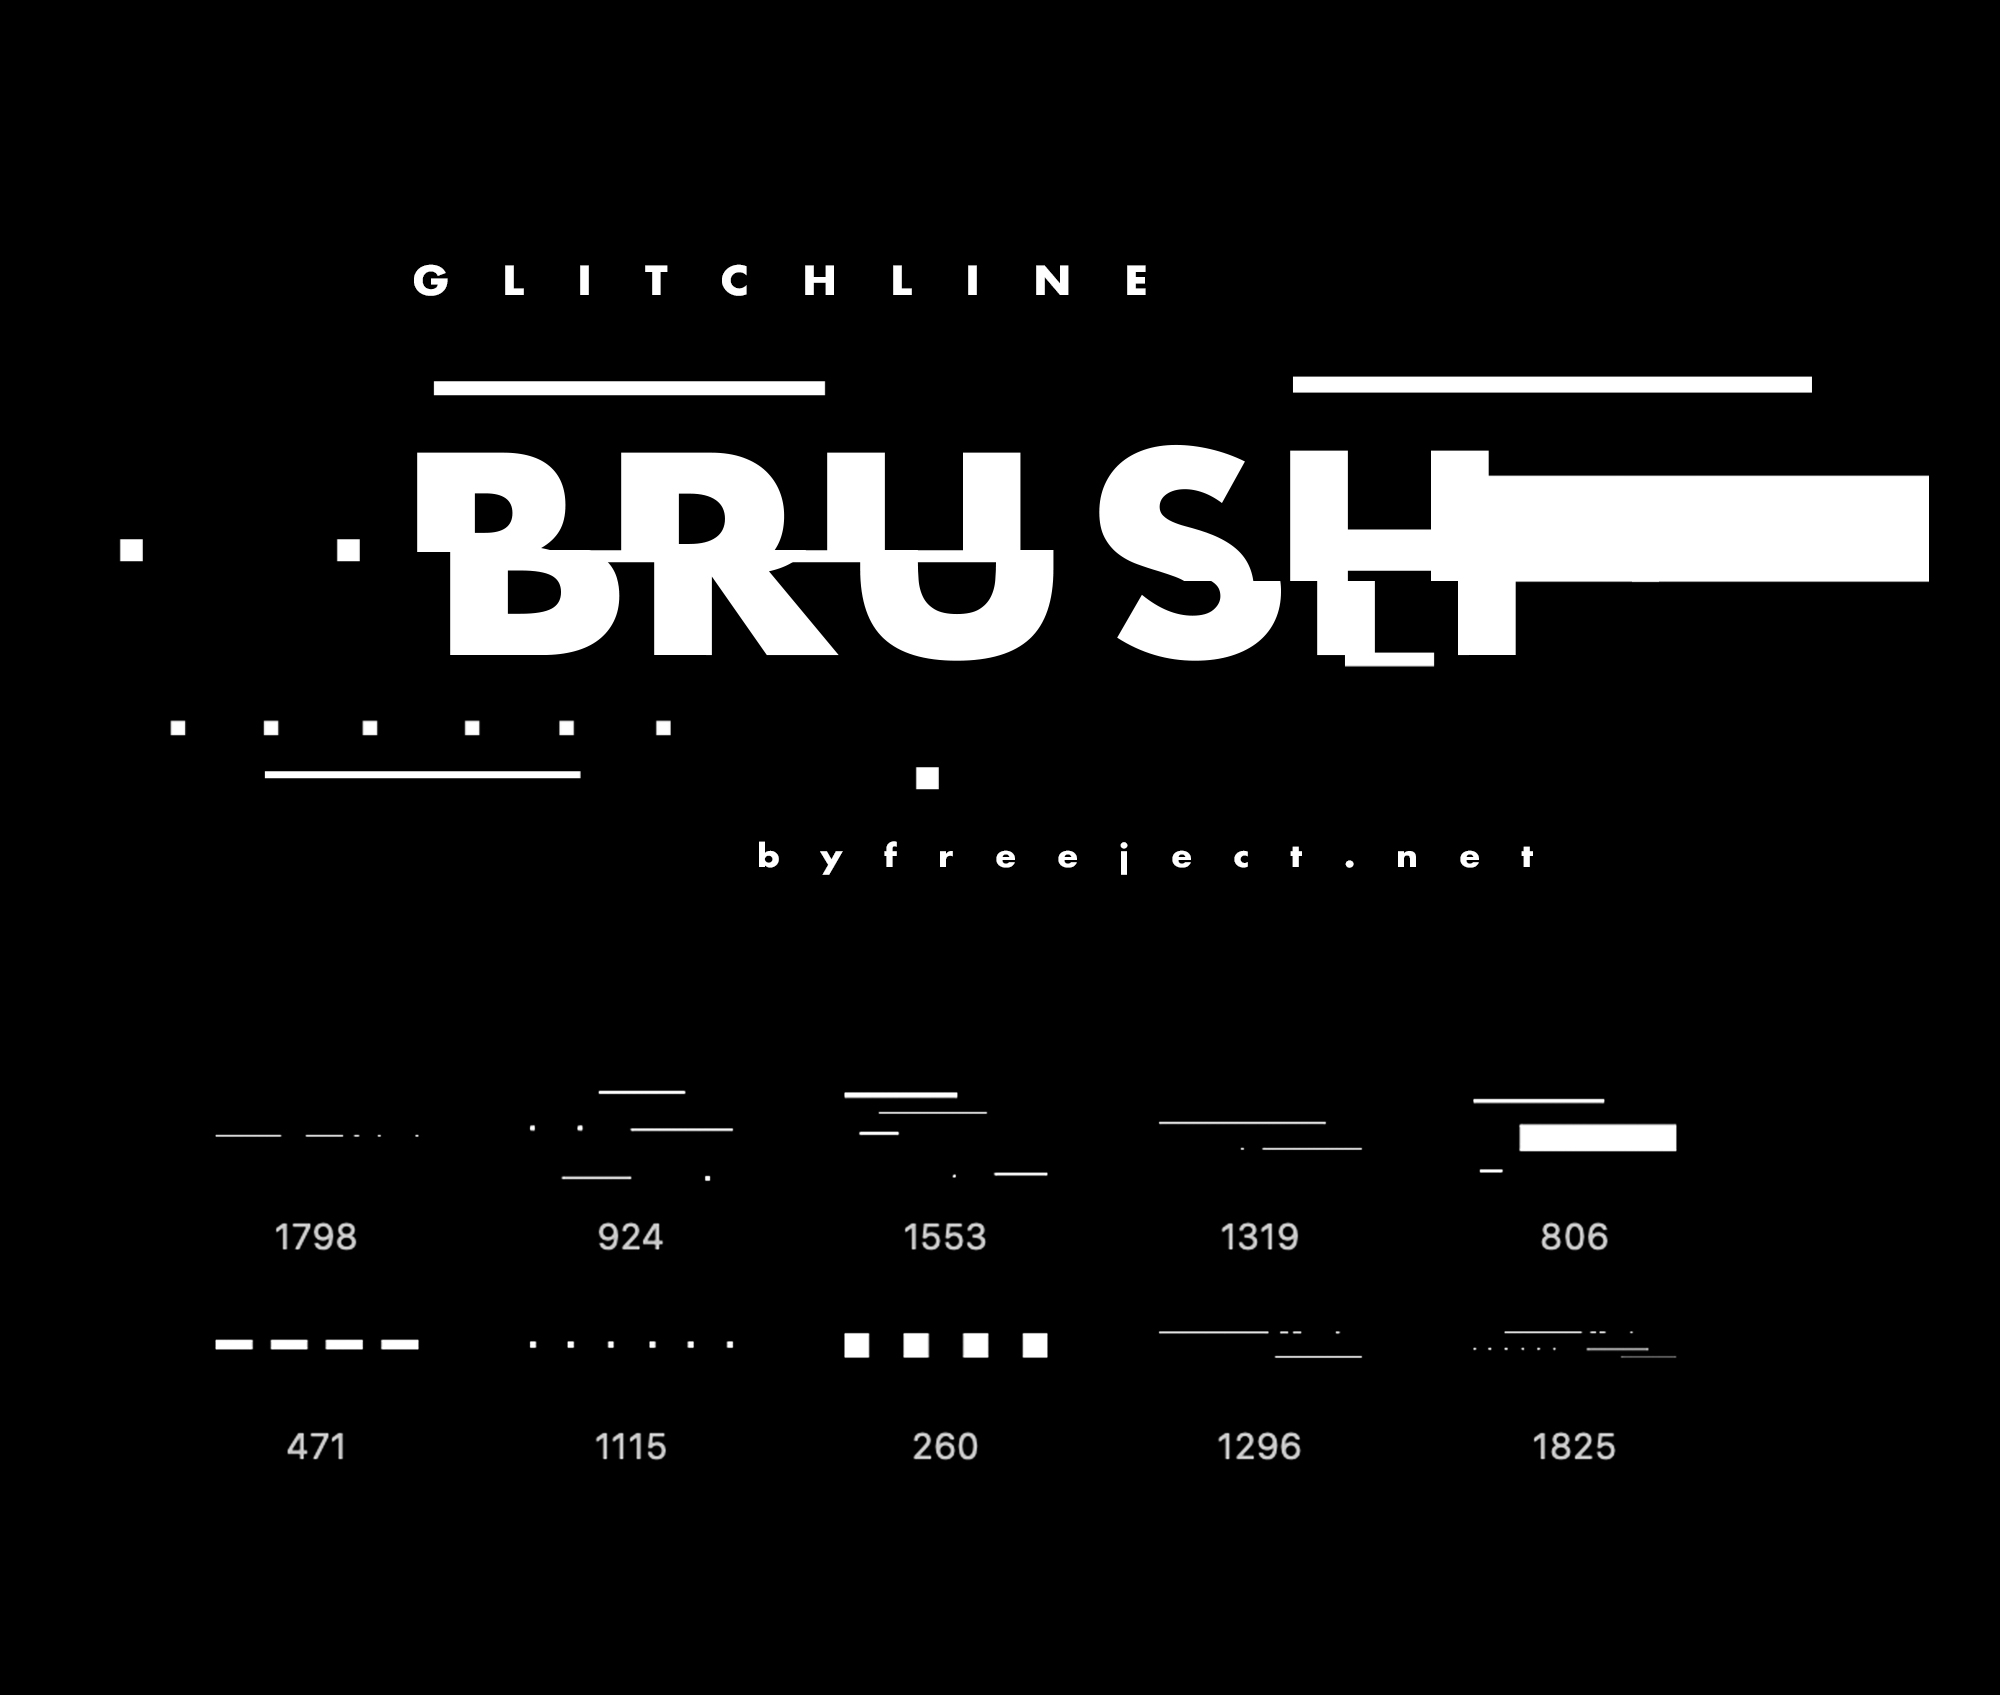 Free Download 10 Glitch Line Photoshop Brush Abr File Freeject